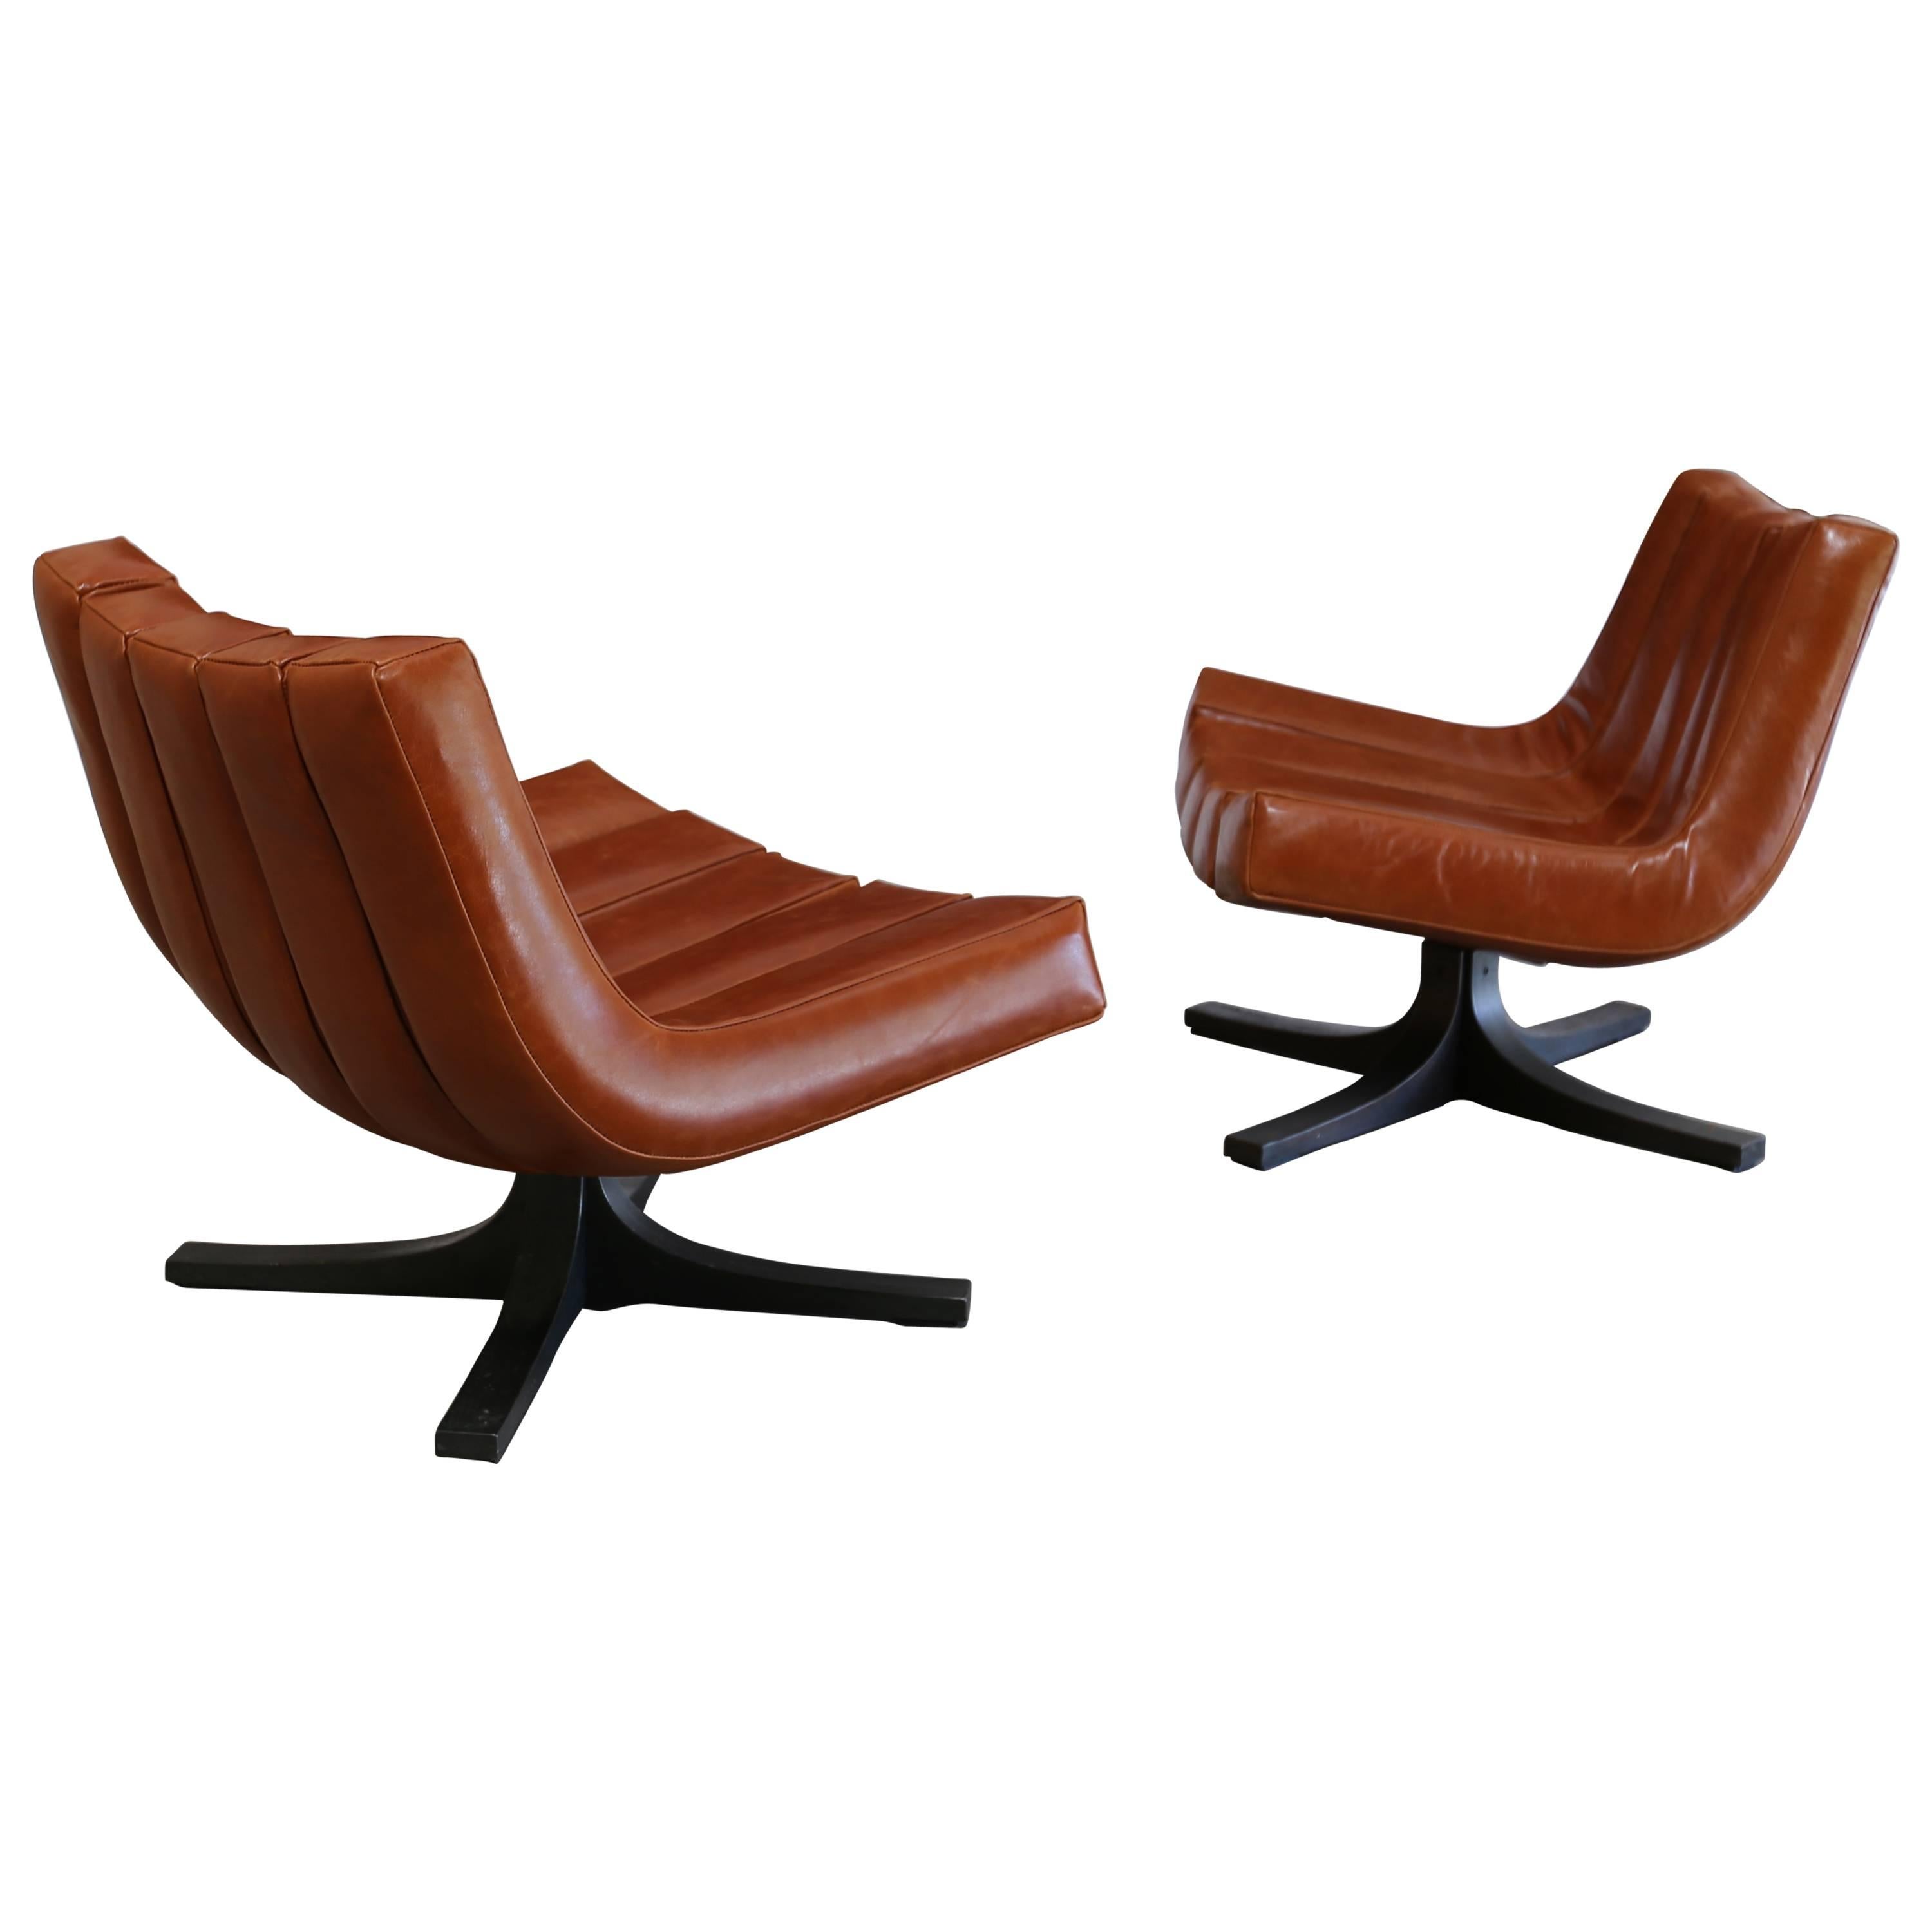 Rare Pair of Swivel Lounge Chairs by Javier Carvajal